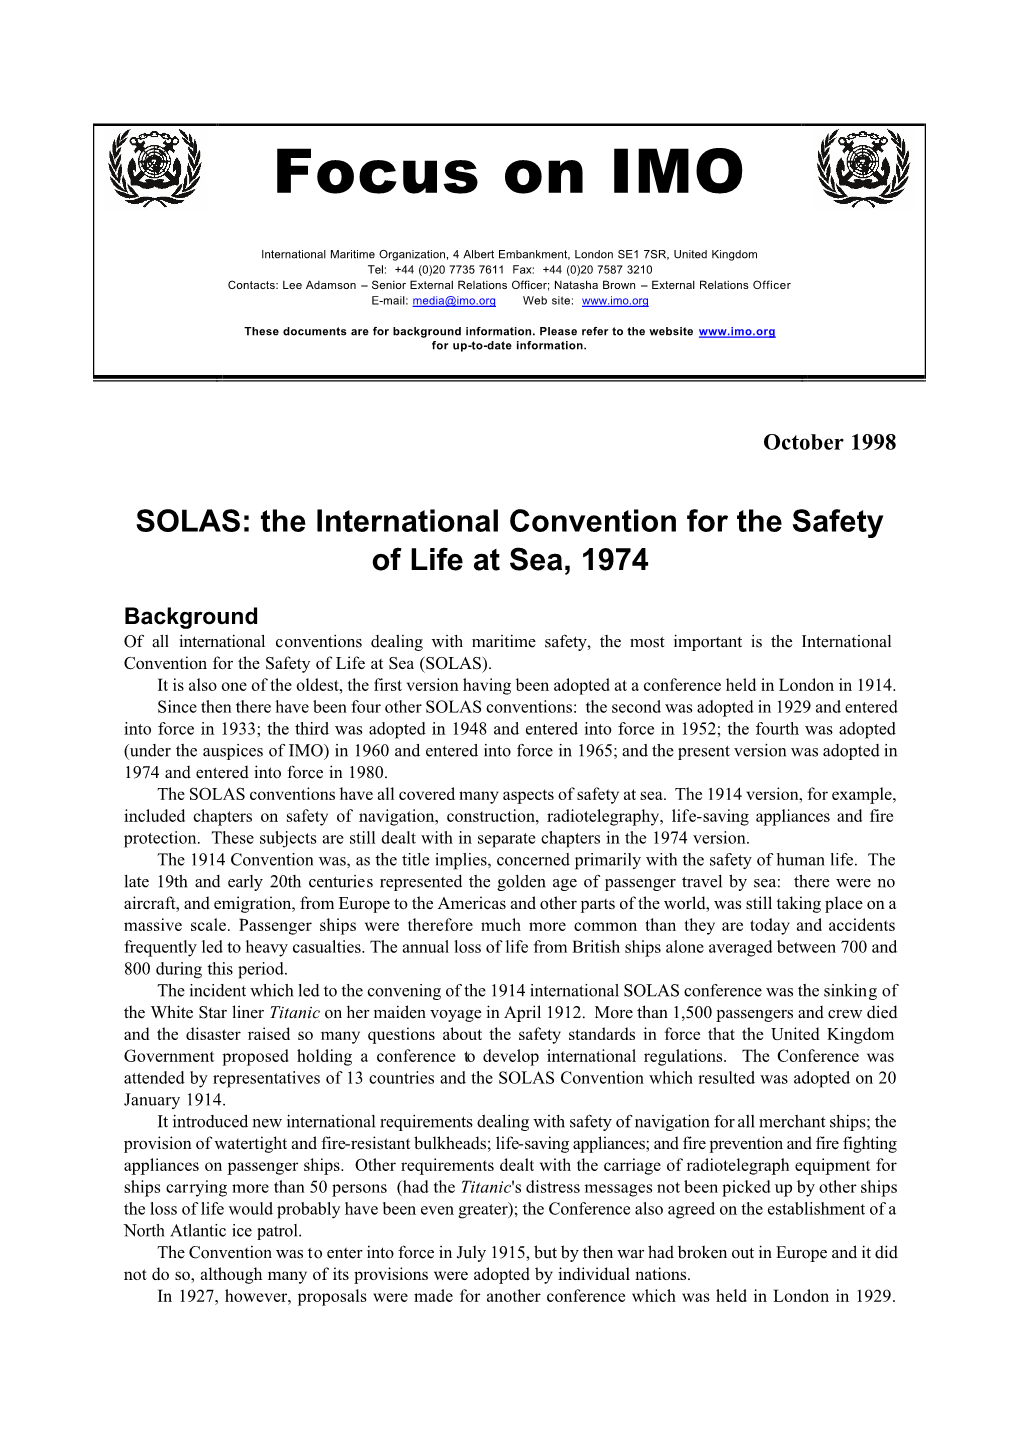 Focus on IMO October 1998: SOLAS